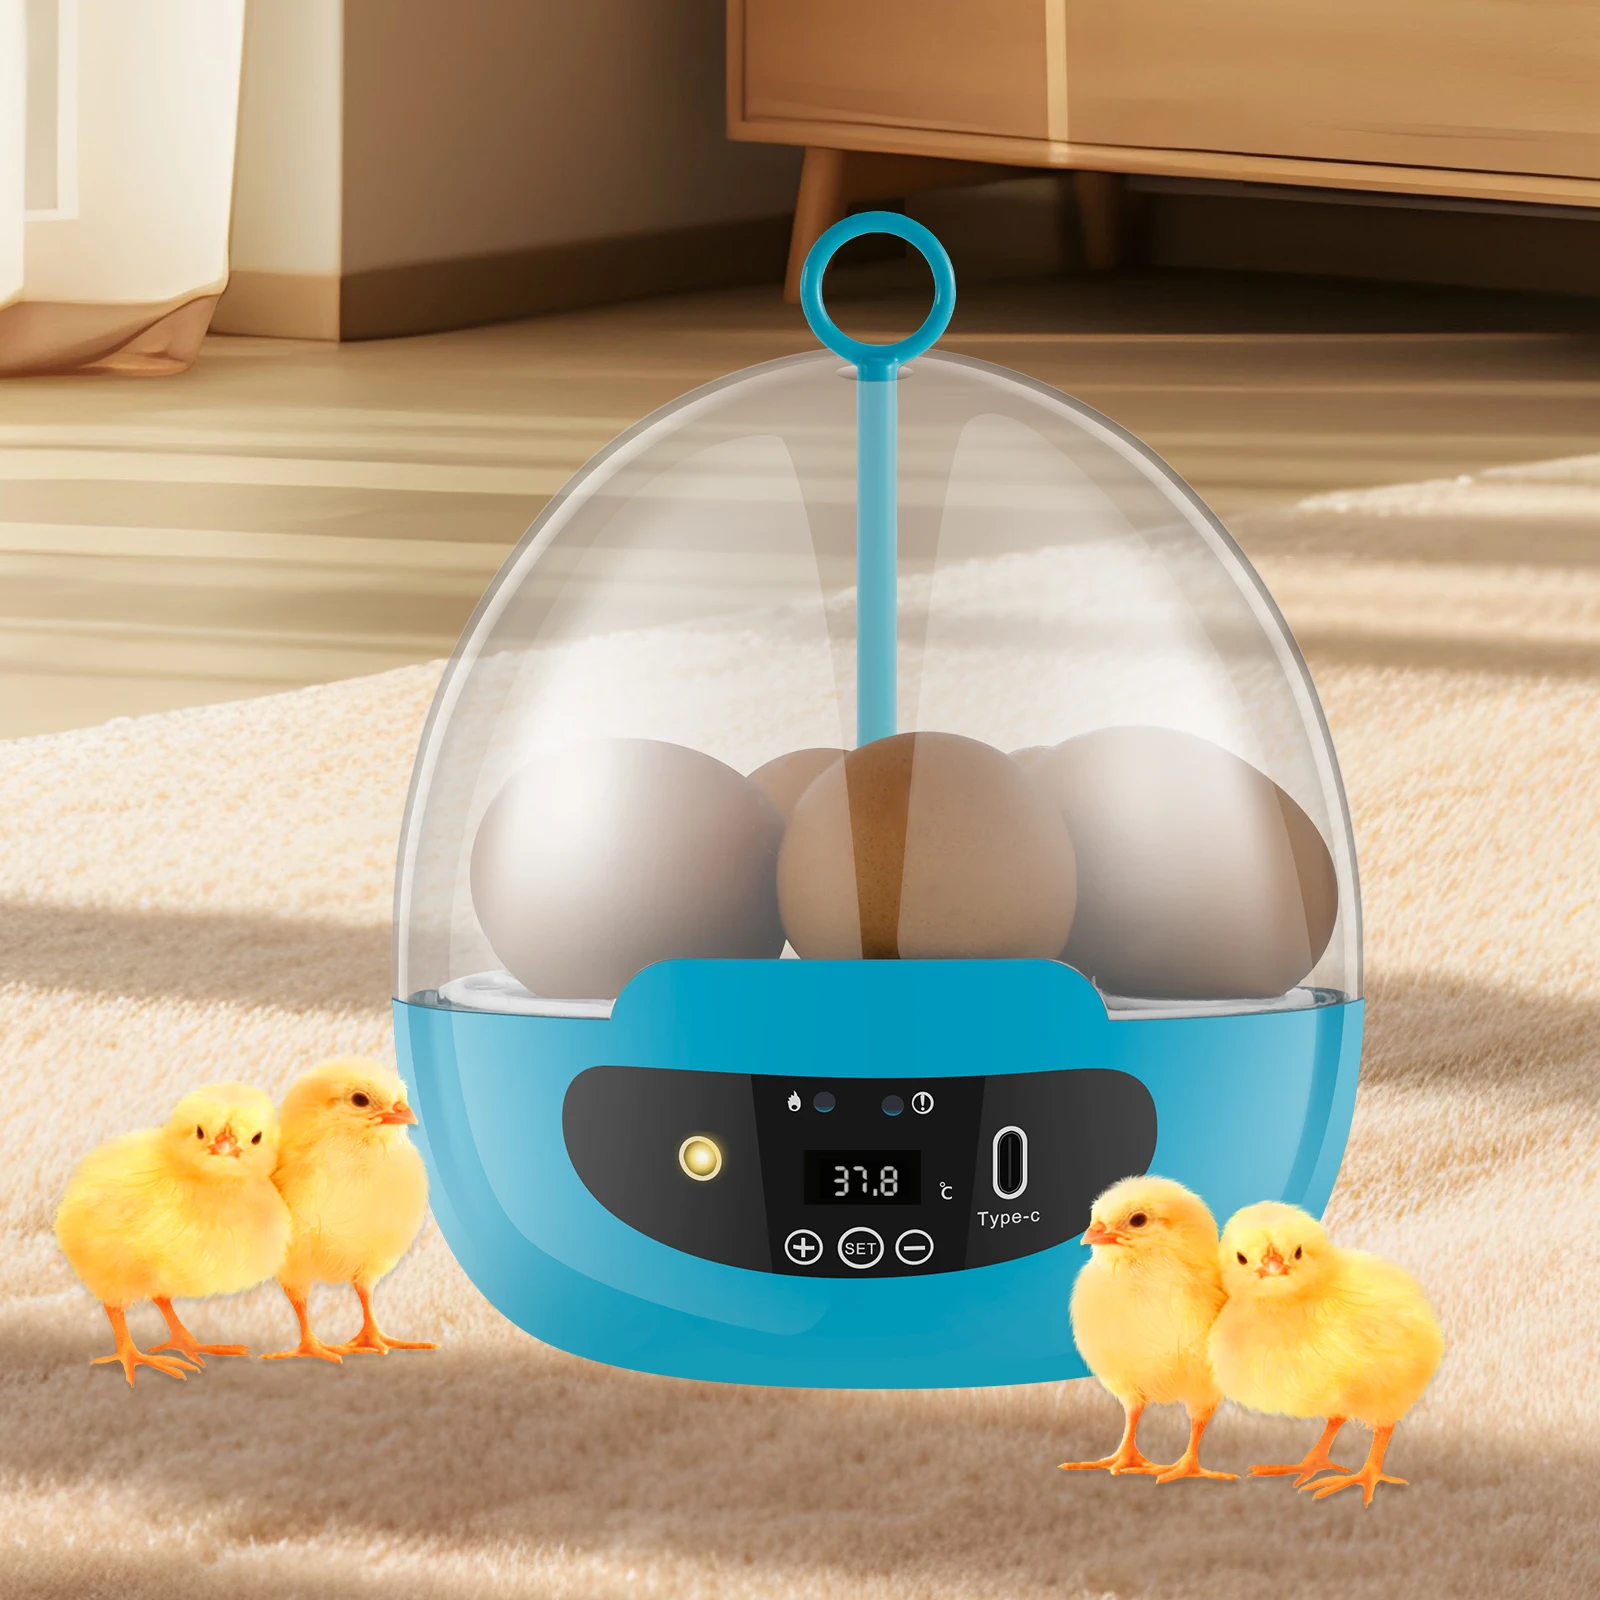 

Egg Incubator Smart Egg Incubator for Hatching 6 Eggs Chicken Incubator with 360° Auto Egg Turning and Temperature Control